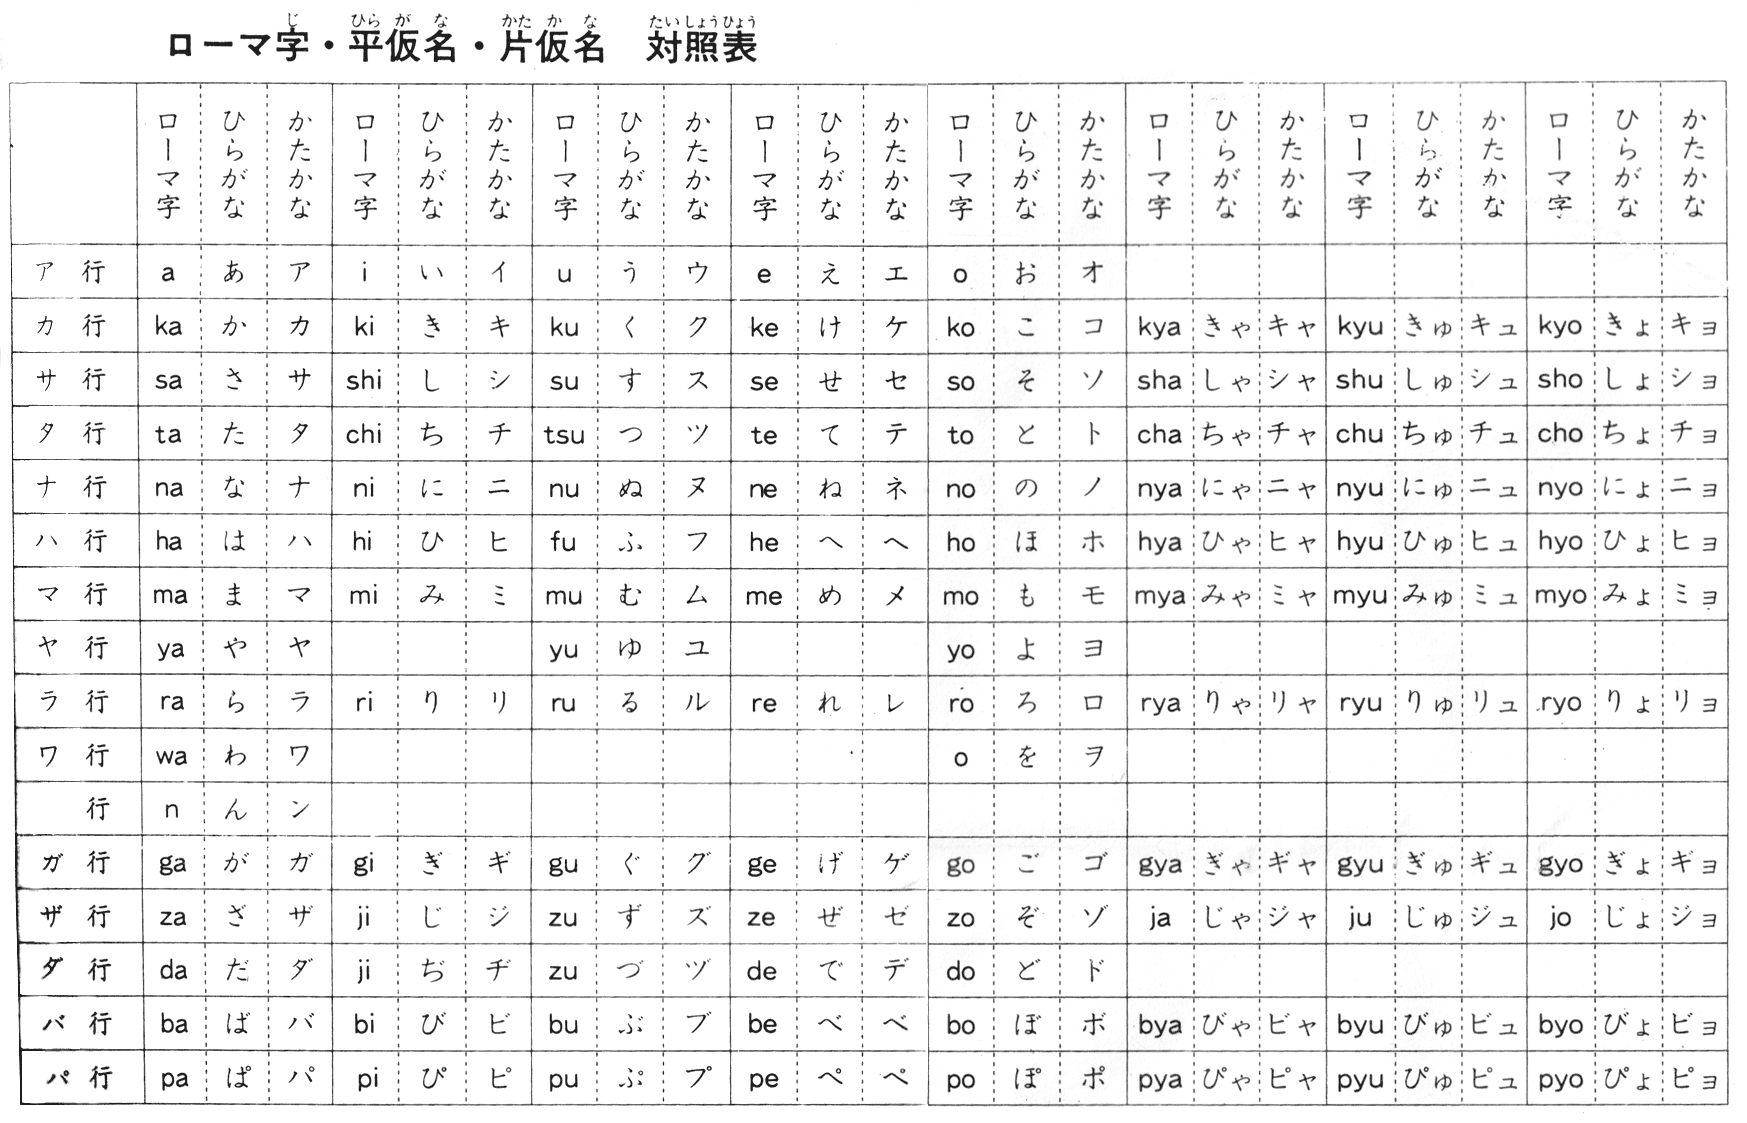 Japanese Alphabet To English | Search Results | Calendar 2015